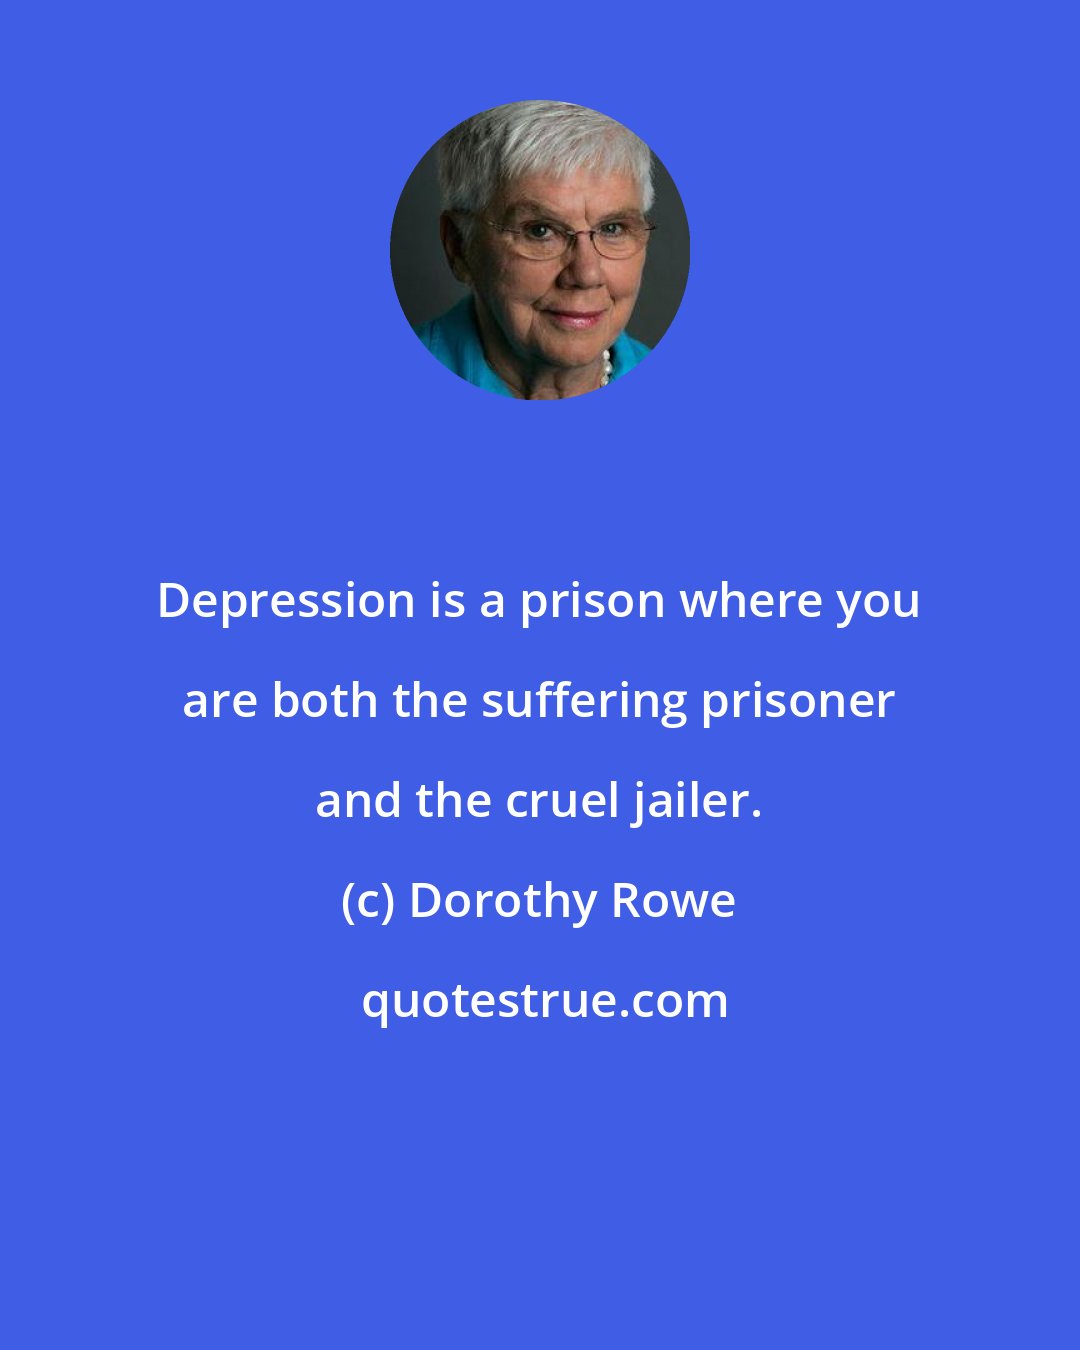 Dorothy Rowe: Depression is a prison where you are both the suffering prisoner and the cruel jailer.